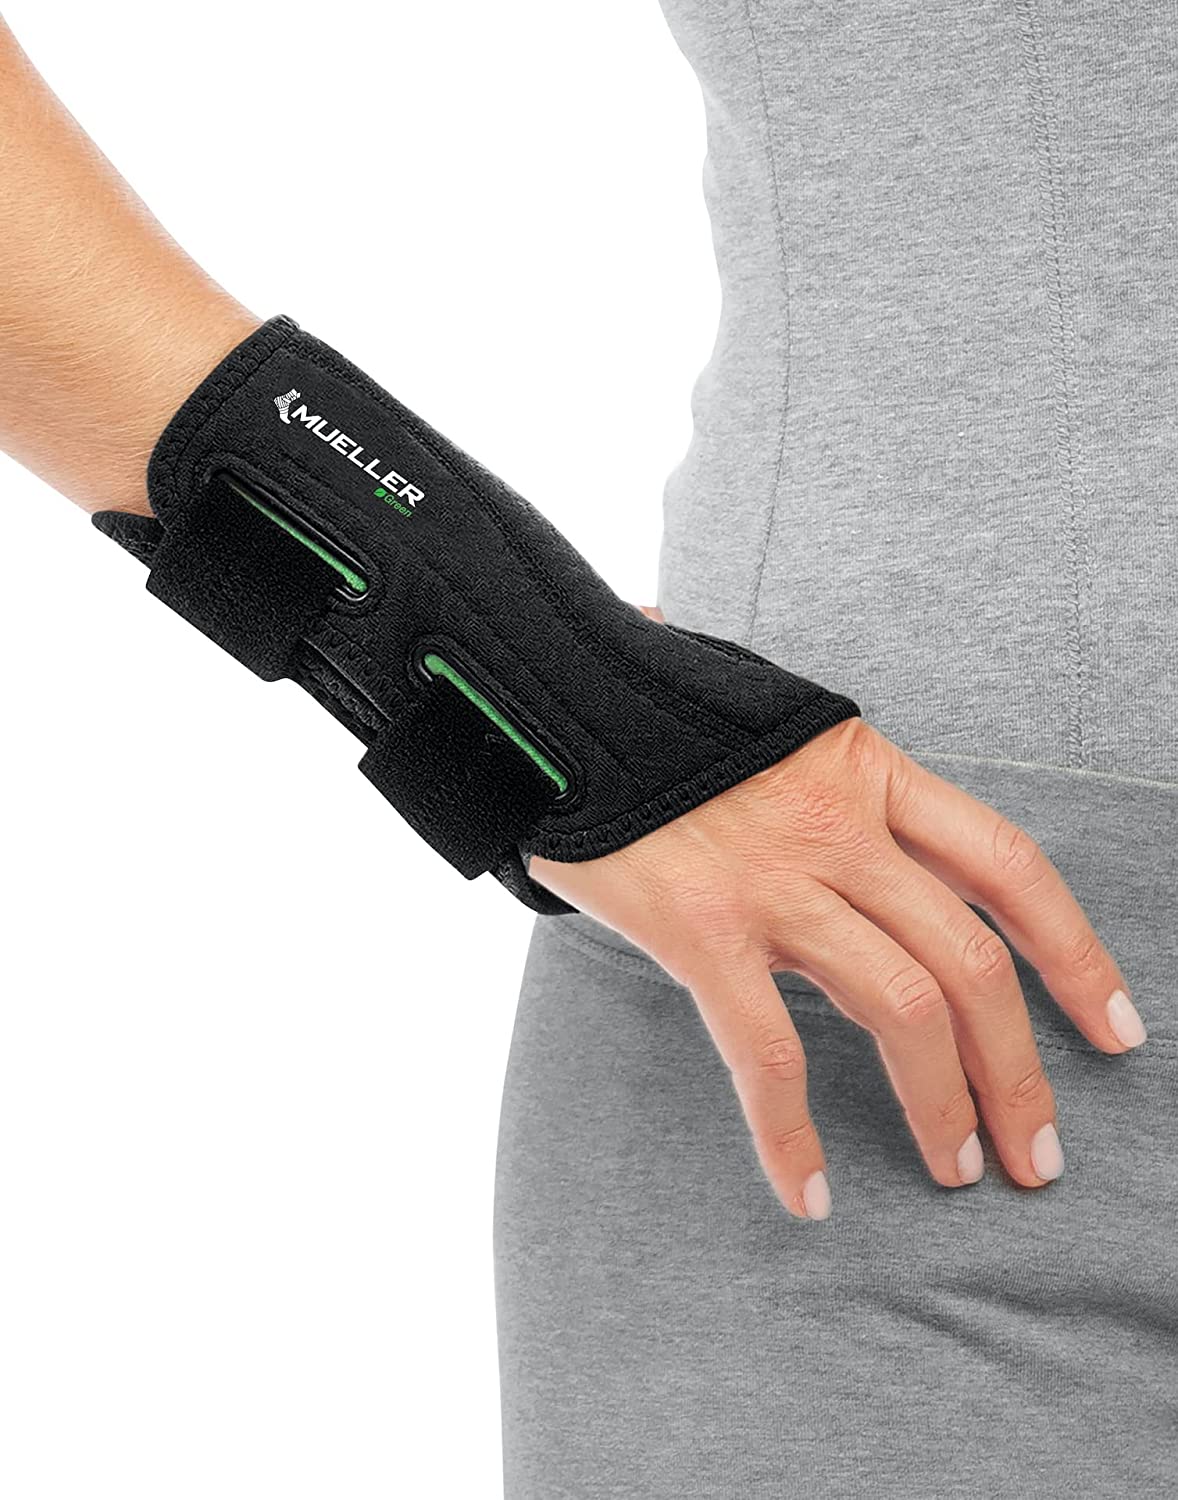 6 Best Carpal Tunnel Braces, According to a Surgeon